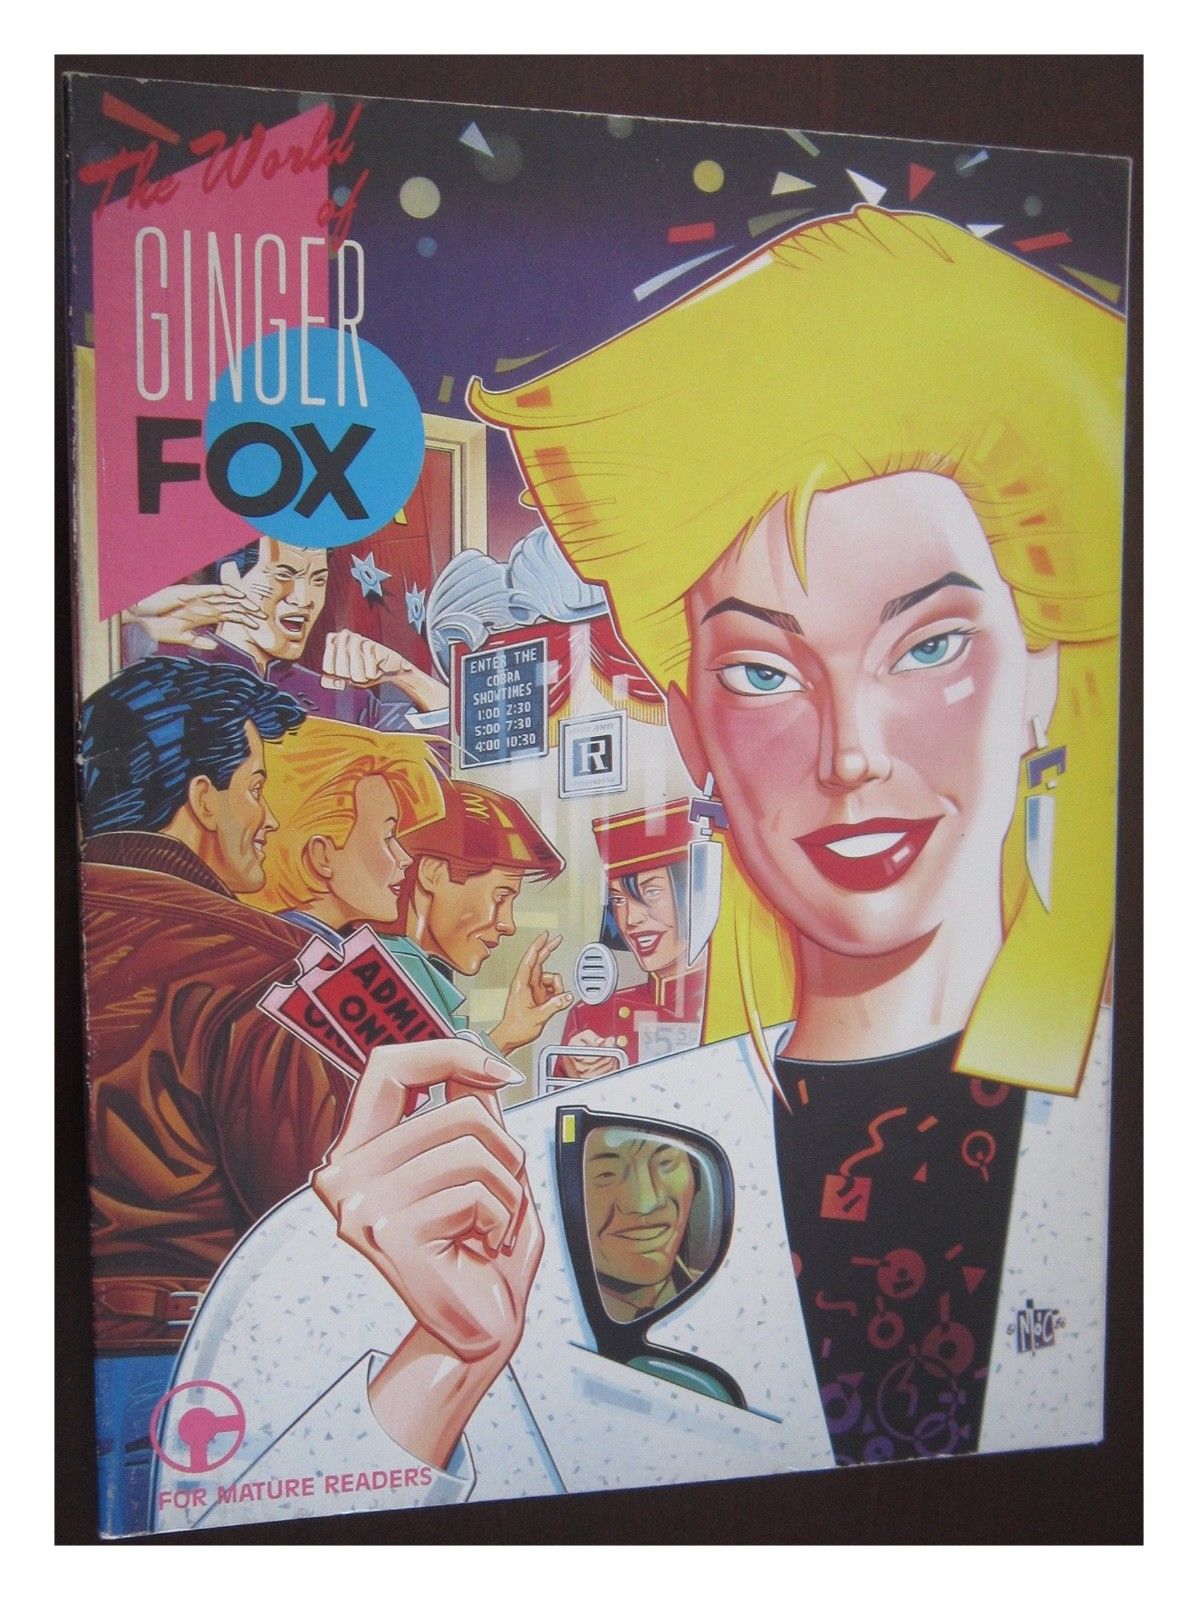 The World of Ginger Fox Paperback – 1 Nov 1986 by Mike Baron - Used